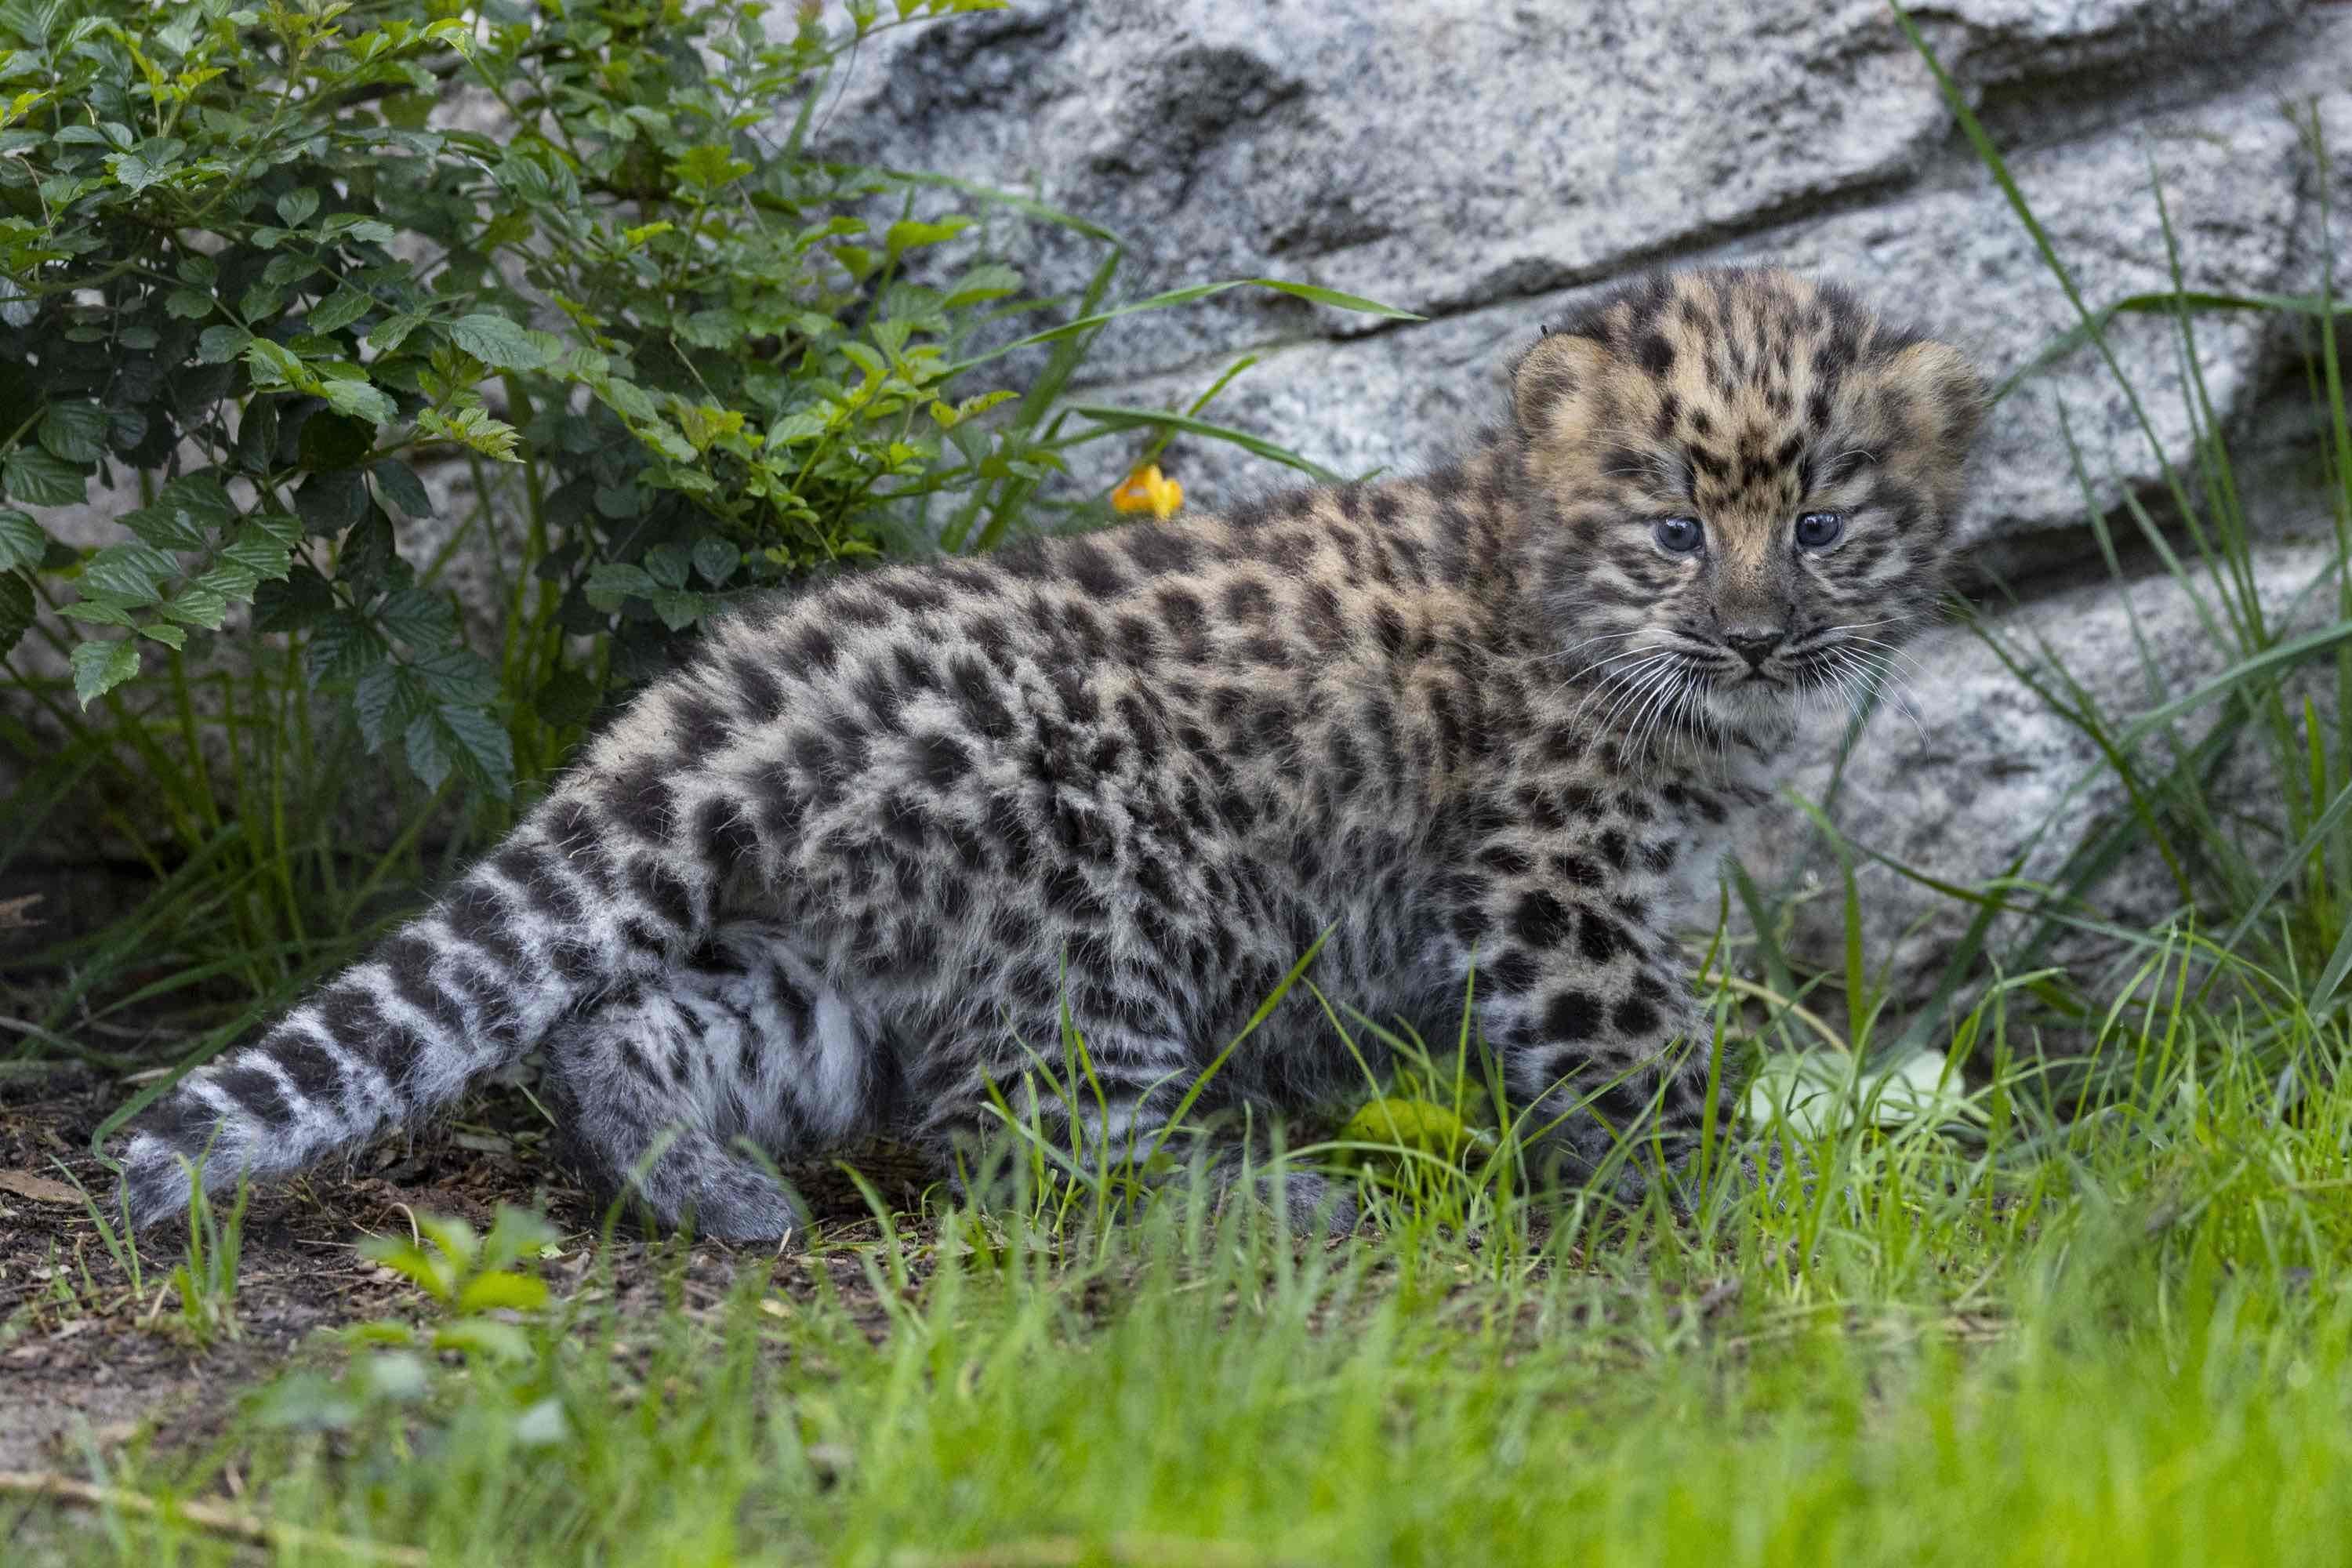 The San Diego Zoo just announced the birth of a pair of Amur leopard cubs. One of the cats is pictured exploring its habitat. (Courtesy San Diego Zoo Wildlife Alliance)